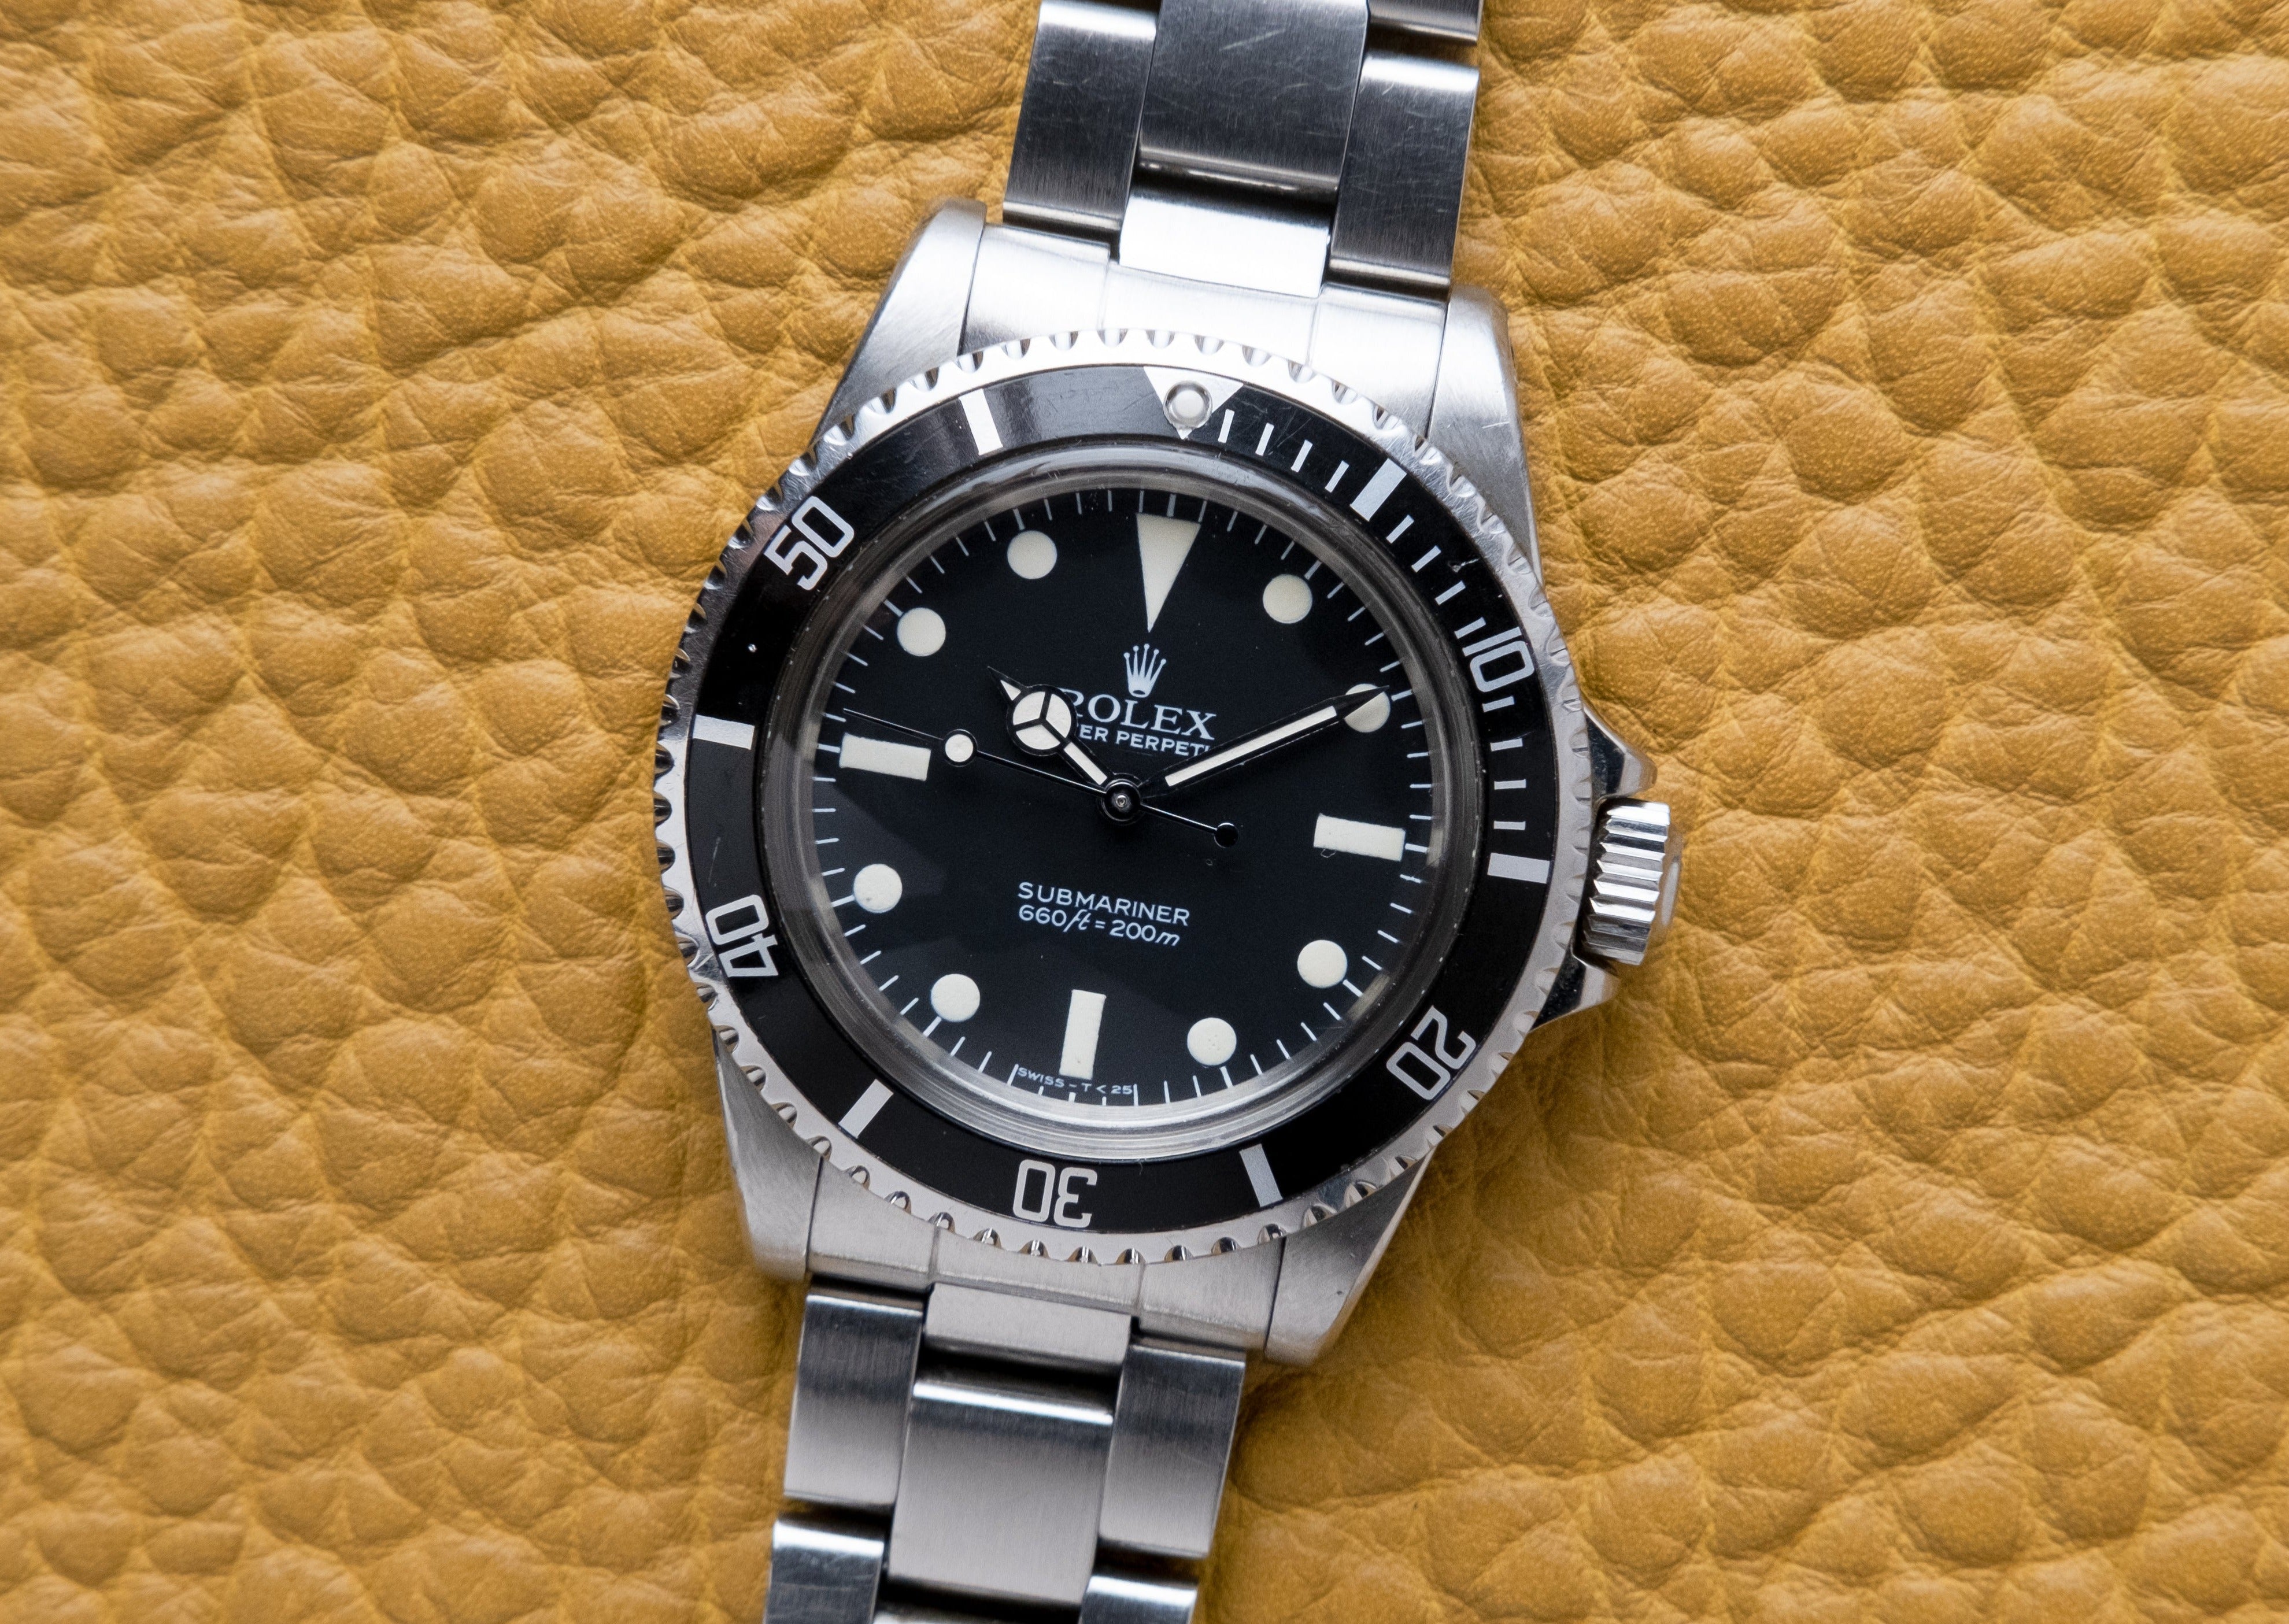 ROLEX Submariner Ref. 5513 Mk5 Maxi Dial (Box, Booklet, Service Papers + Guarantee)  (1984)